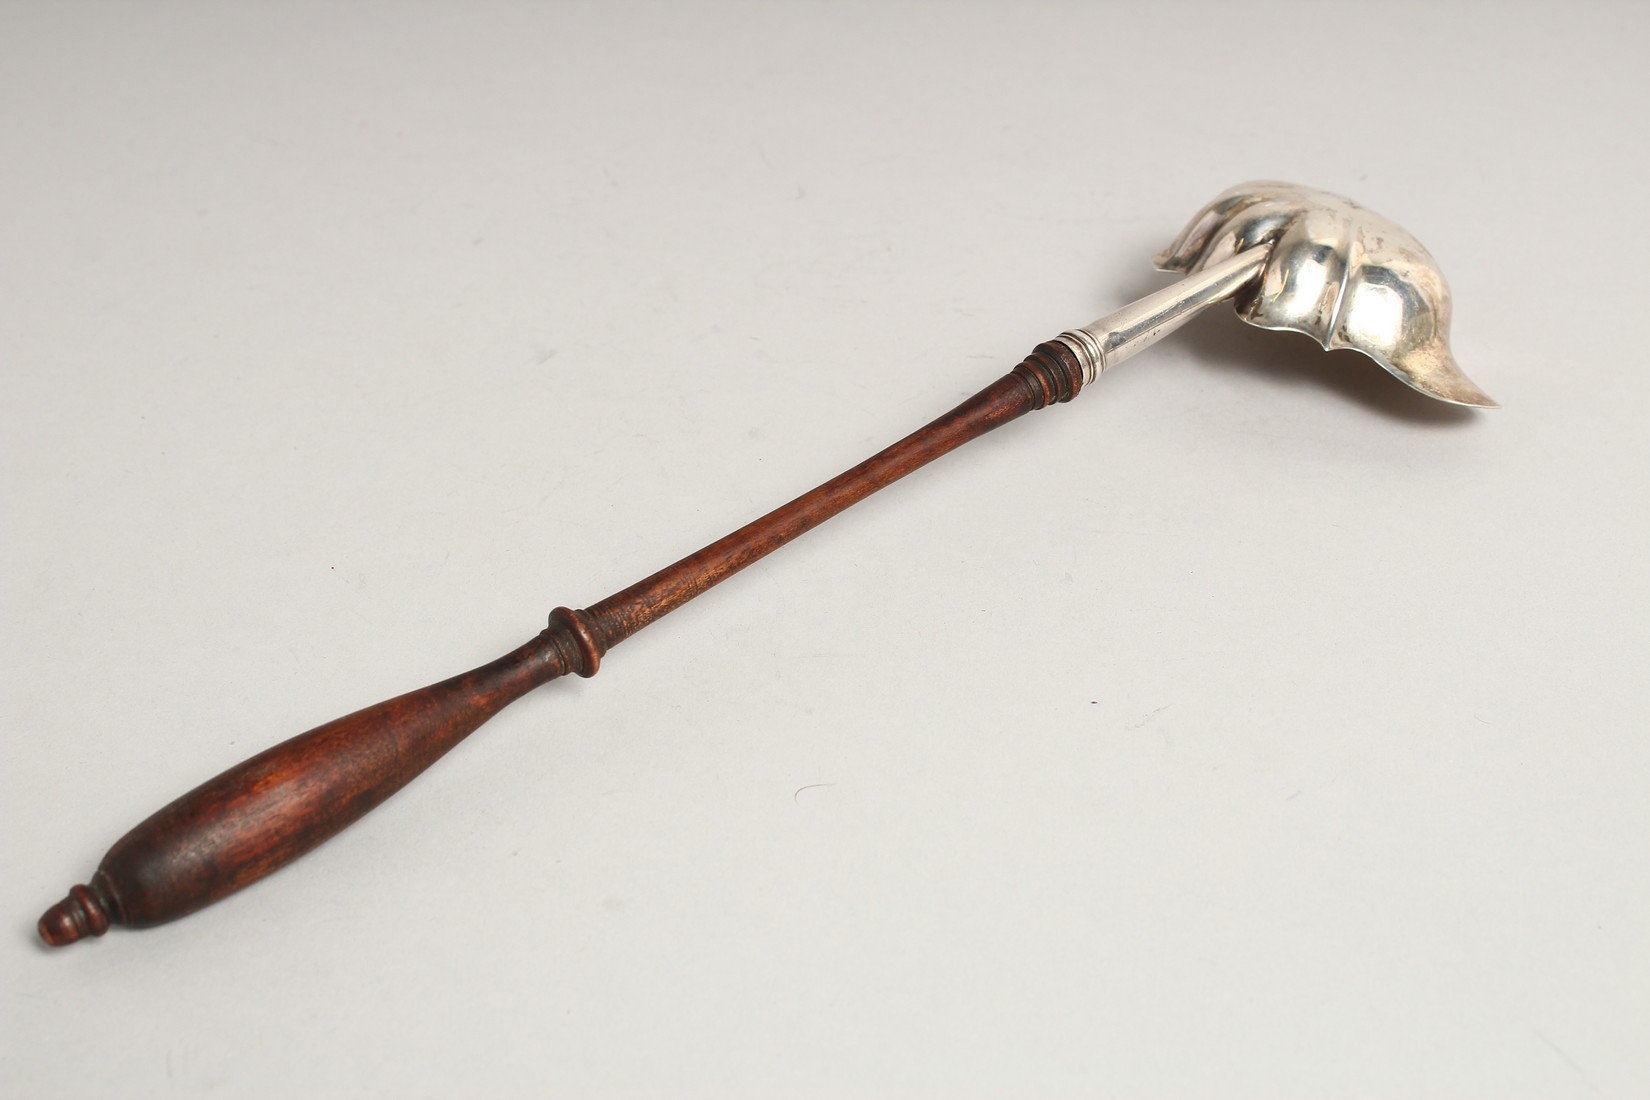 A GEORGE III SILVER PUNCH LADLE with turned wood handle. London 1772. Maker, W. B. - Image 6 of 6